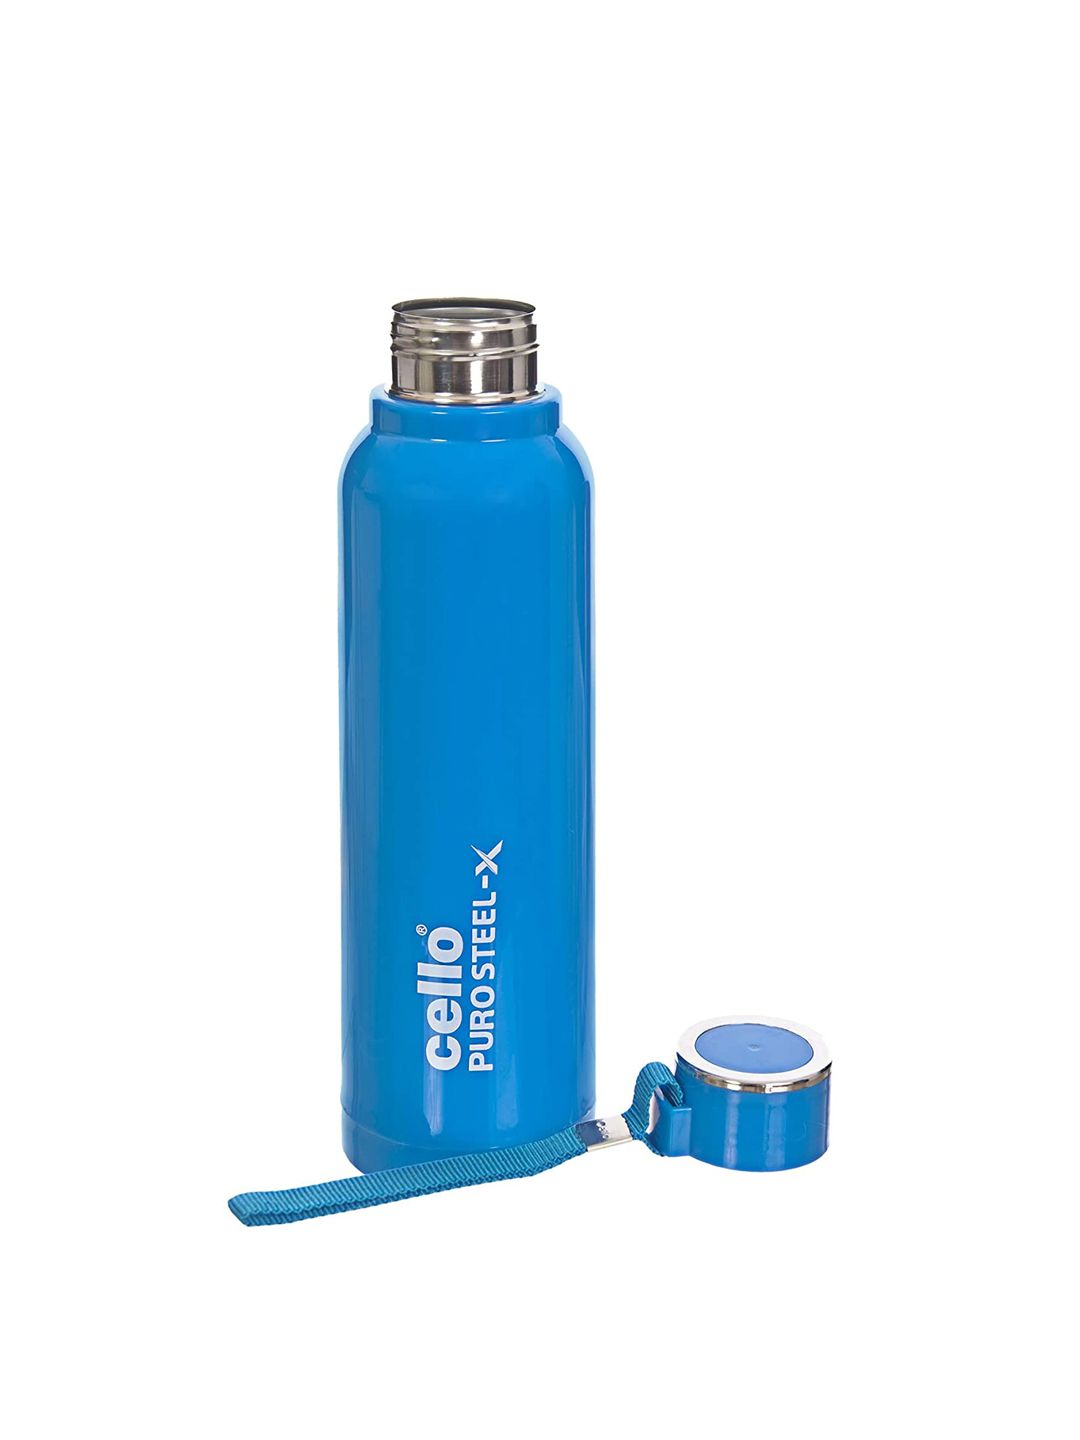 Cello Blue stainless steel water bottle 900ML Price in India